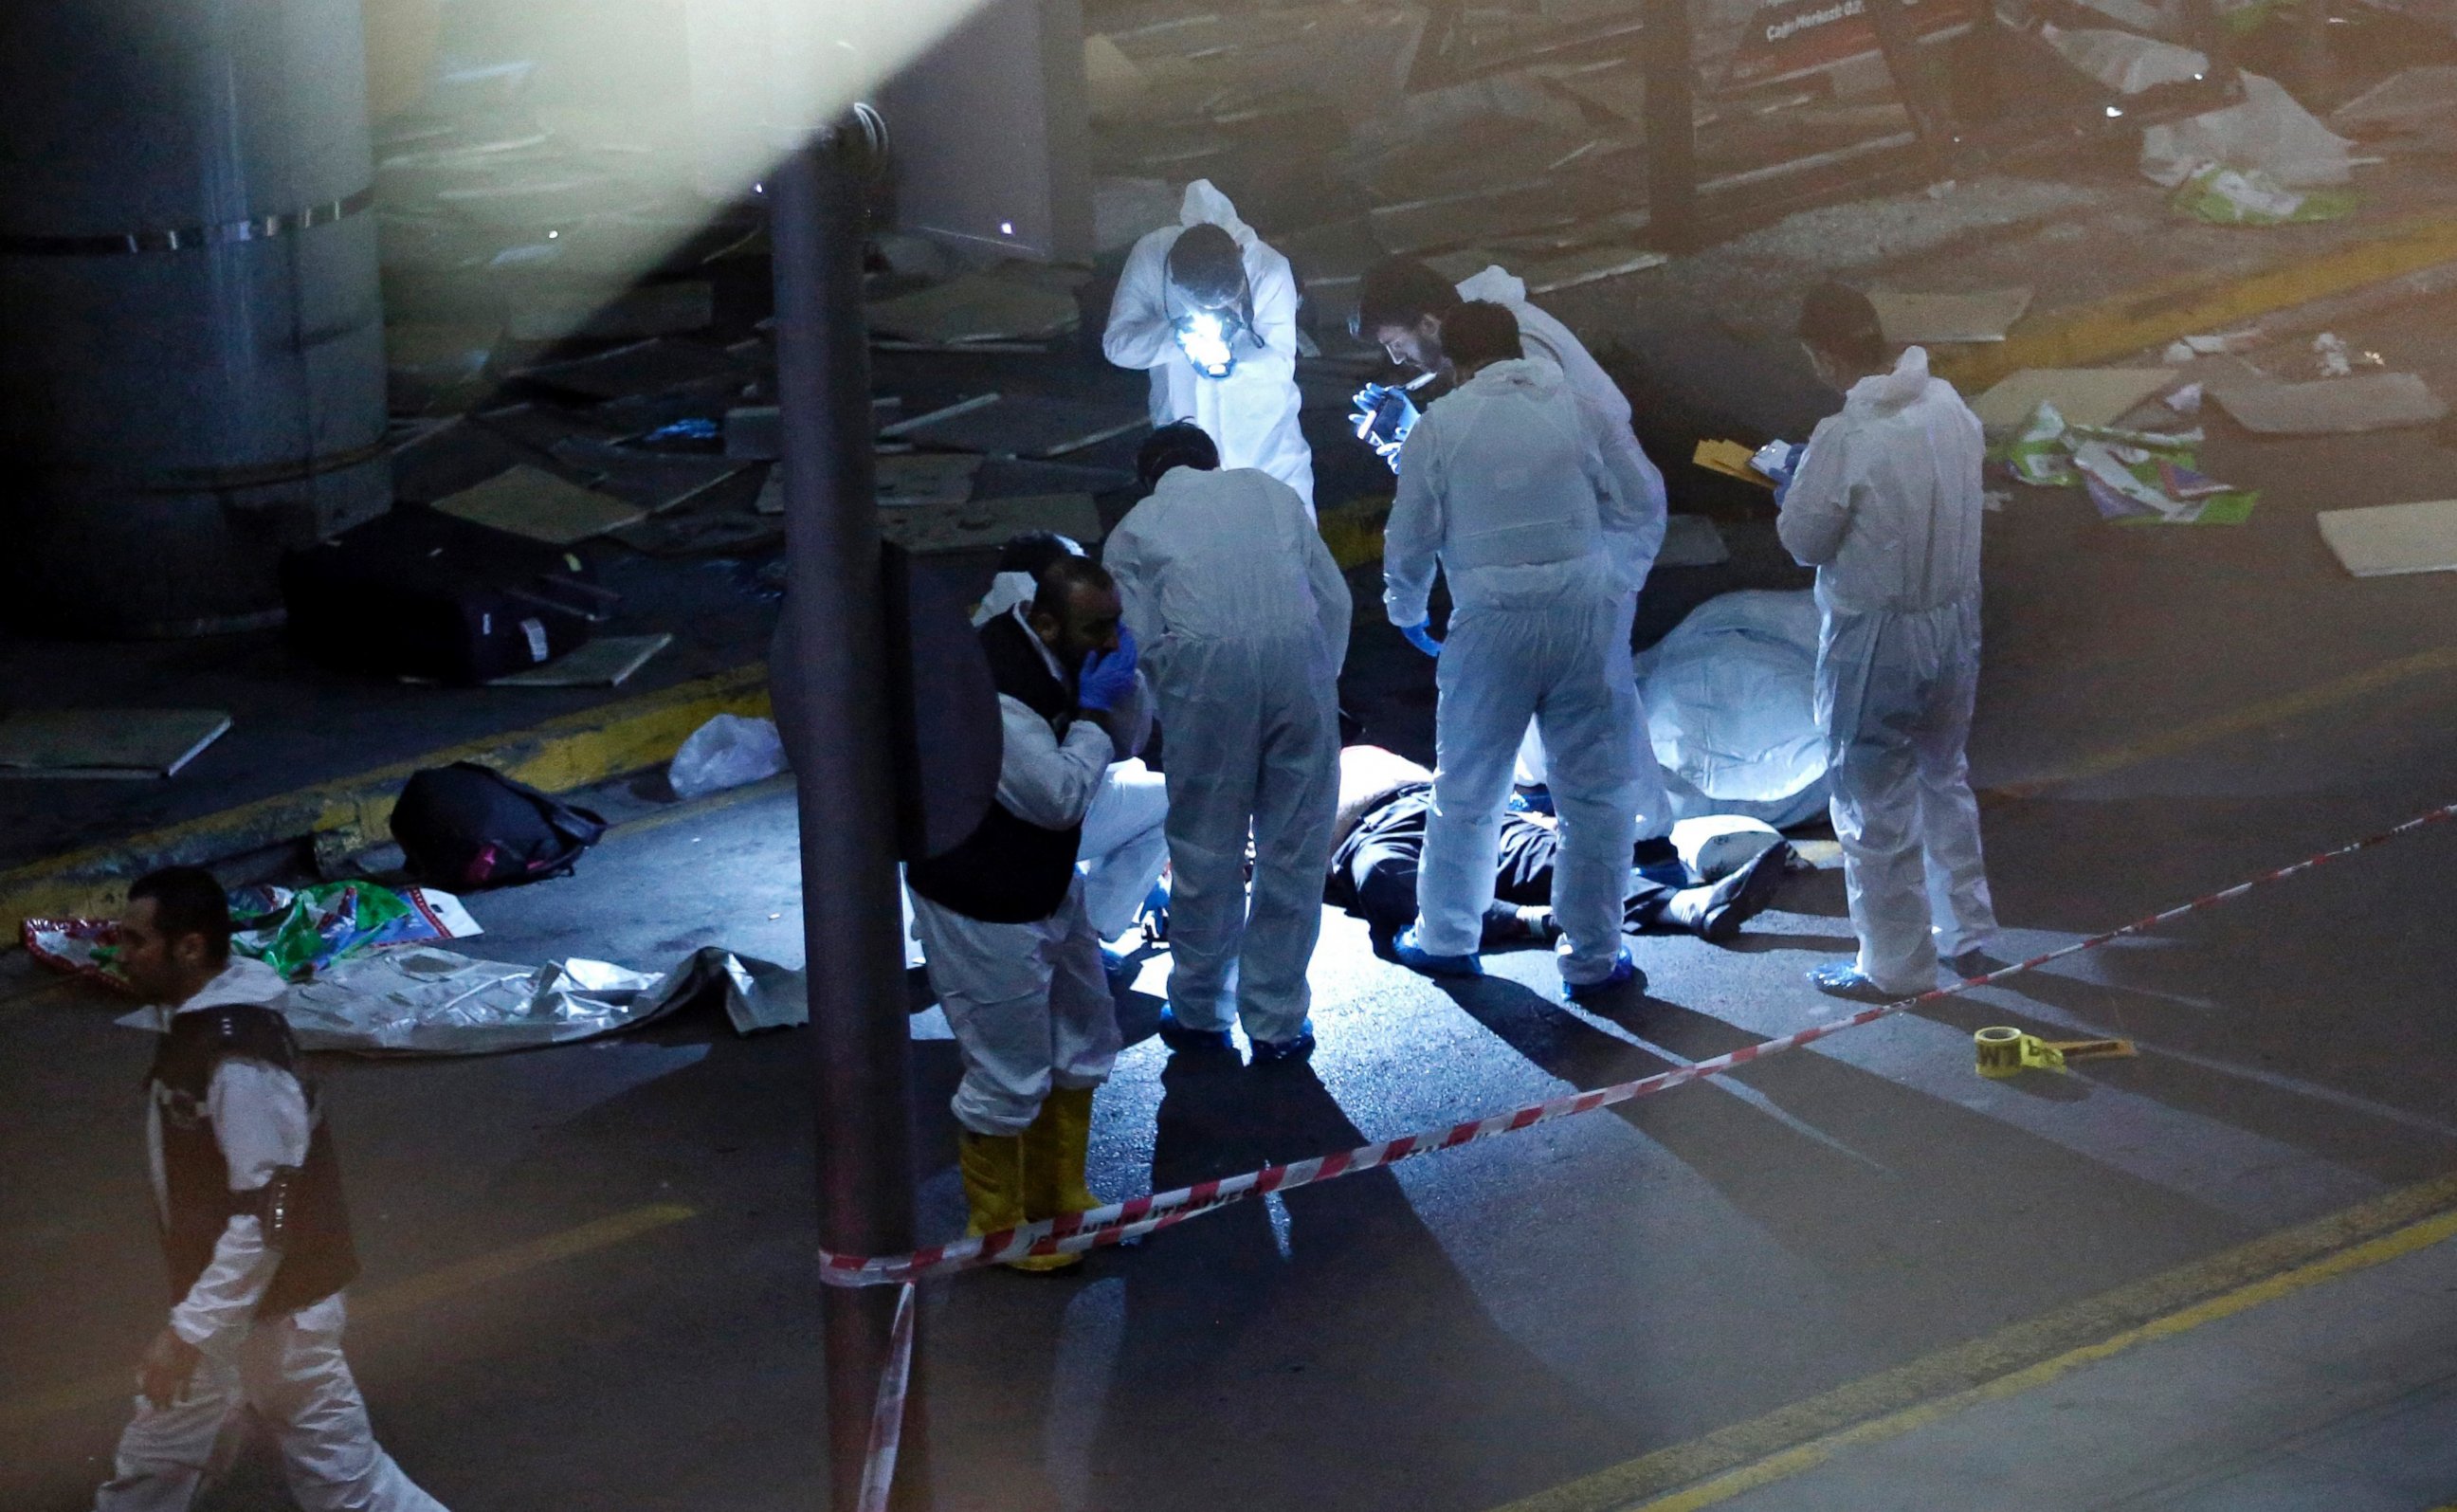 PHOTO: Crime scene investigators work next to a body after an attack at Ataturk Airport in Istanbul, Turkey, June 28, 2016.